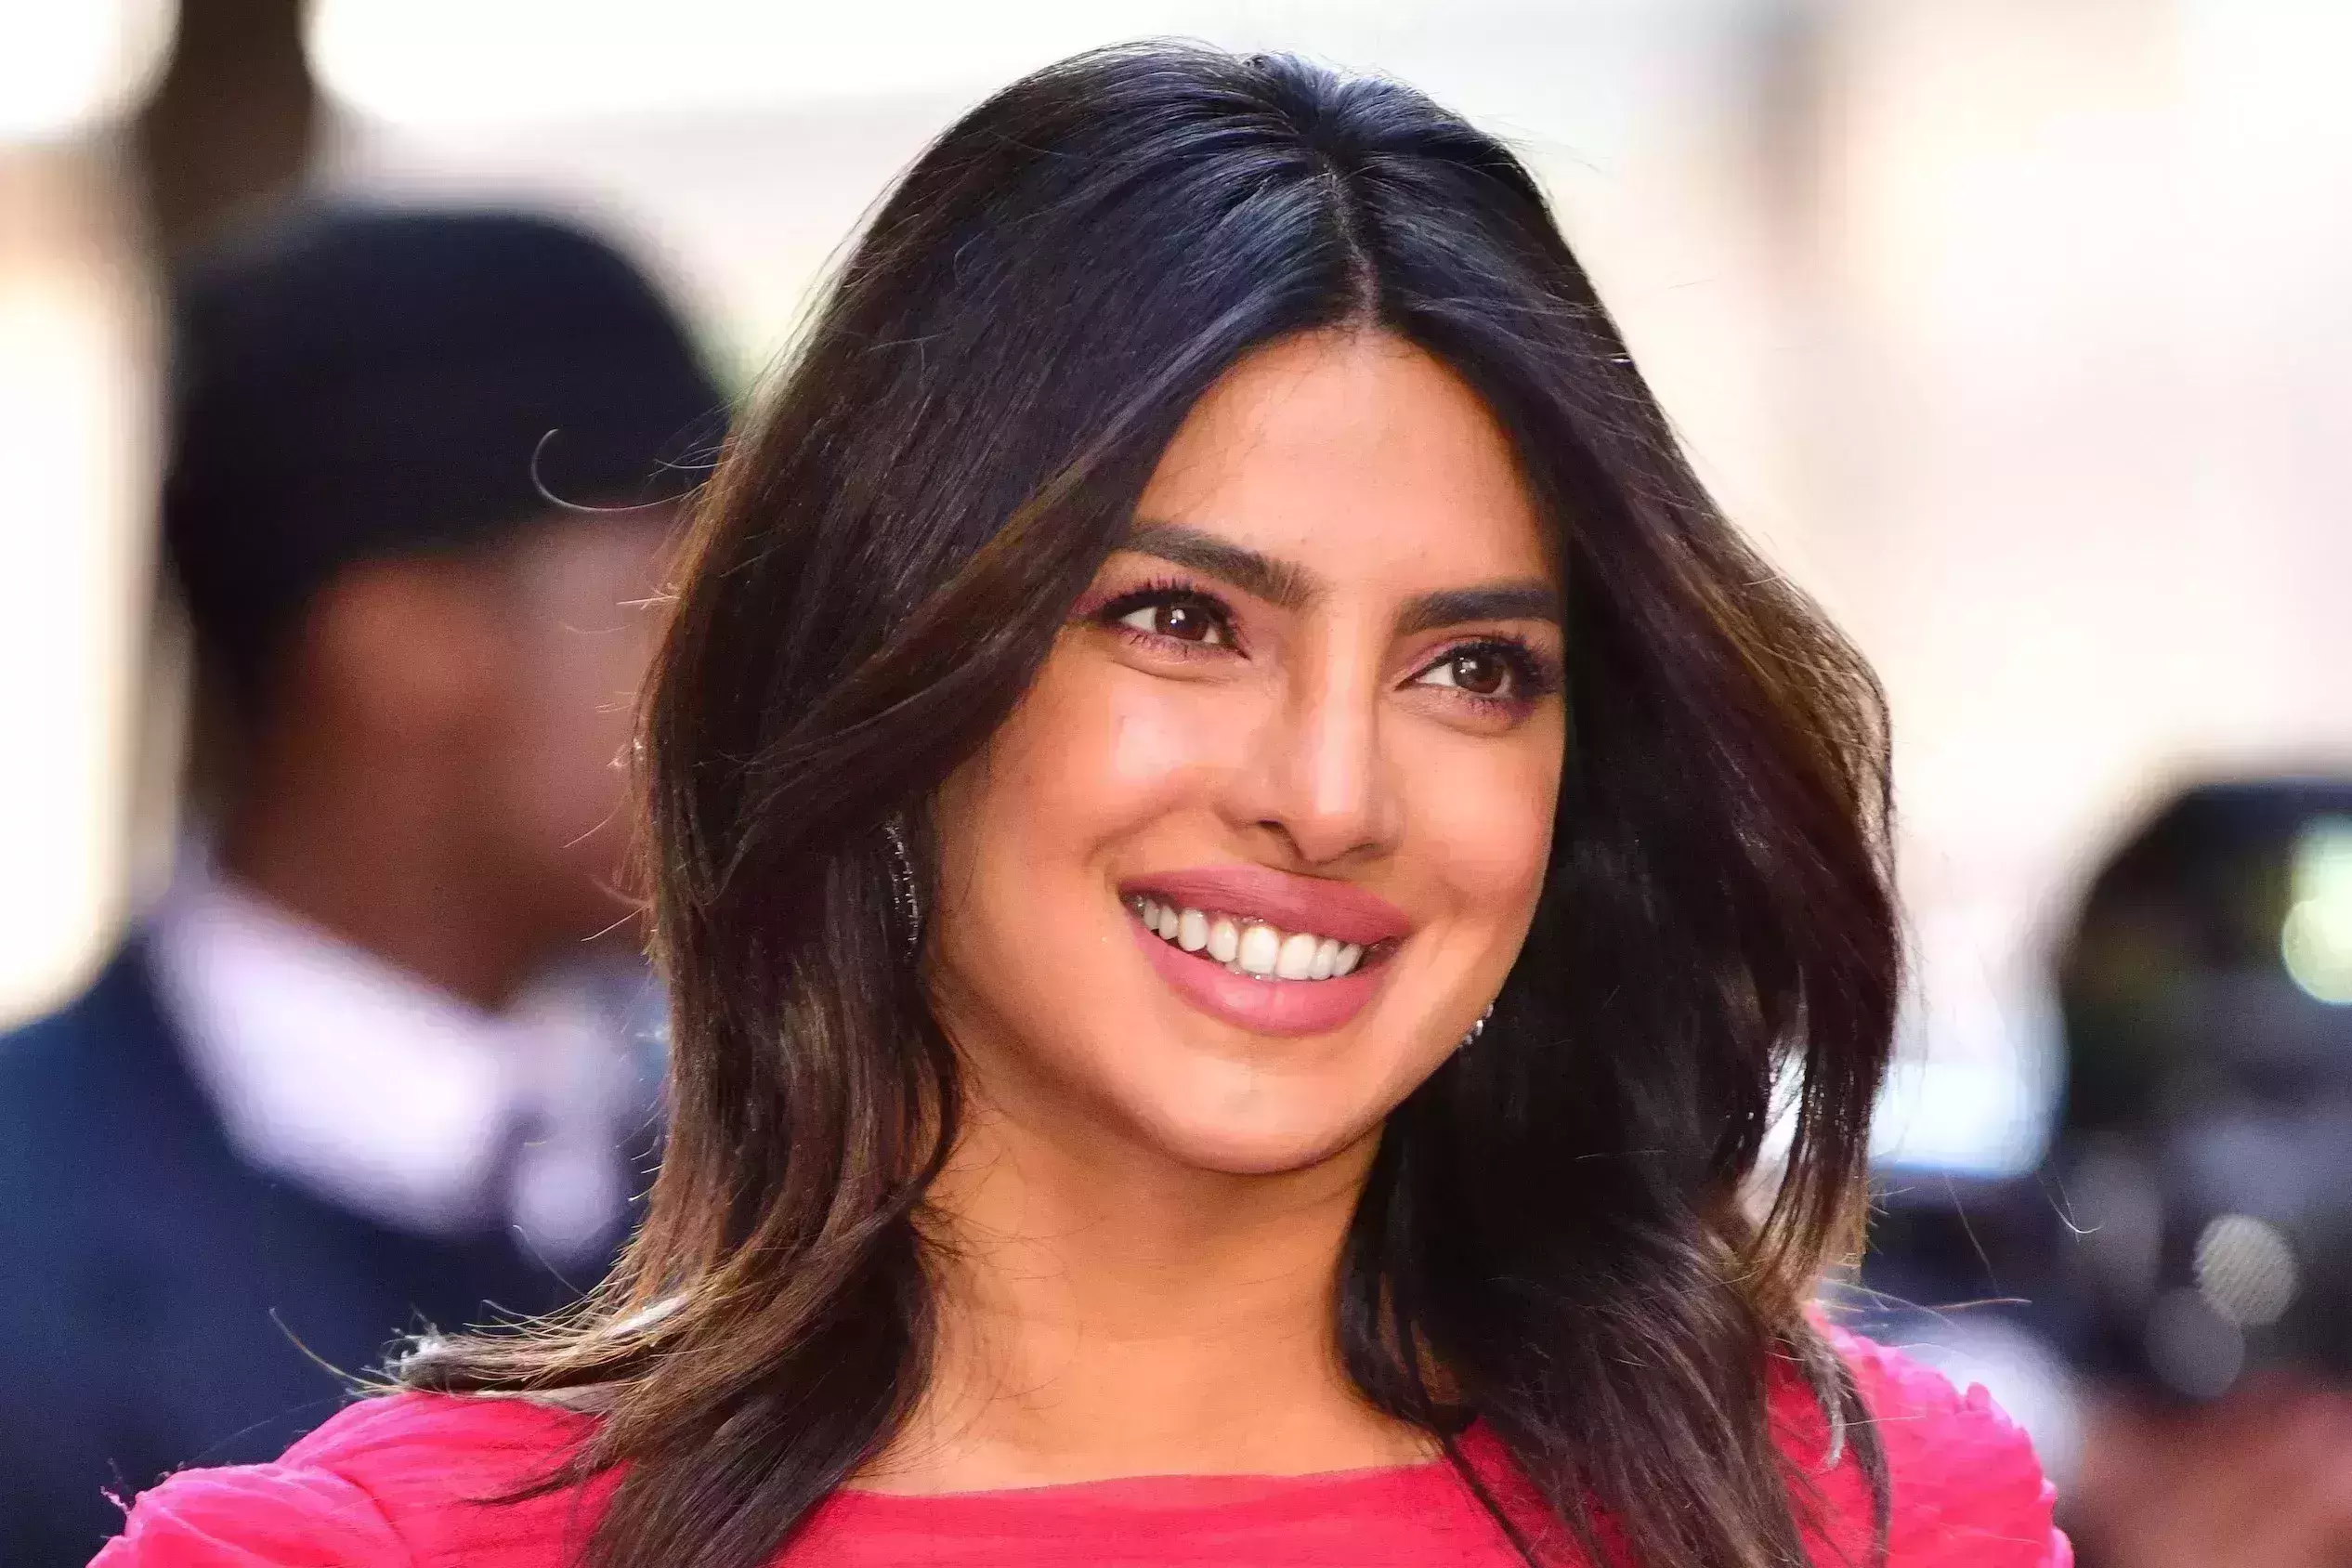 Priyanka Chopra tired of Bollywood politics; moved to US as she had beef with people in industry